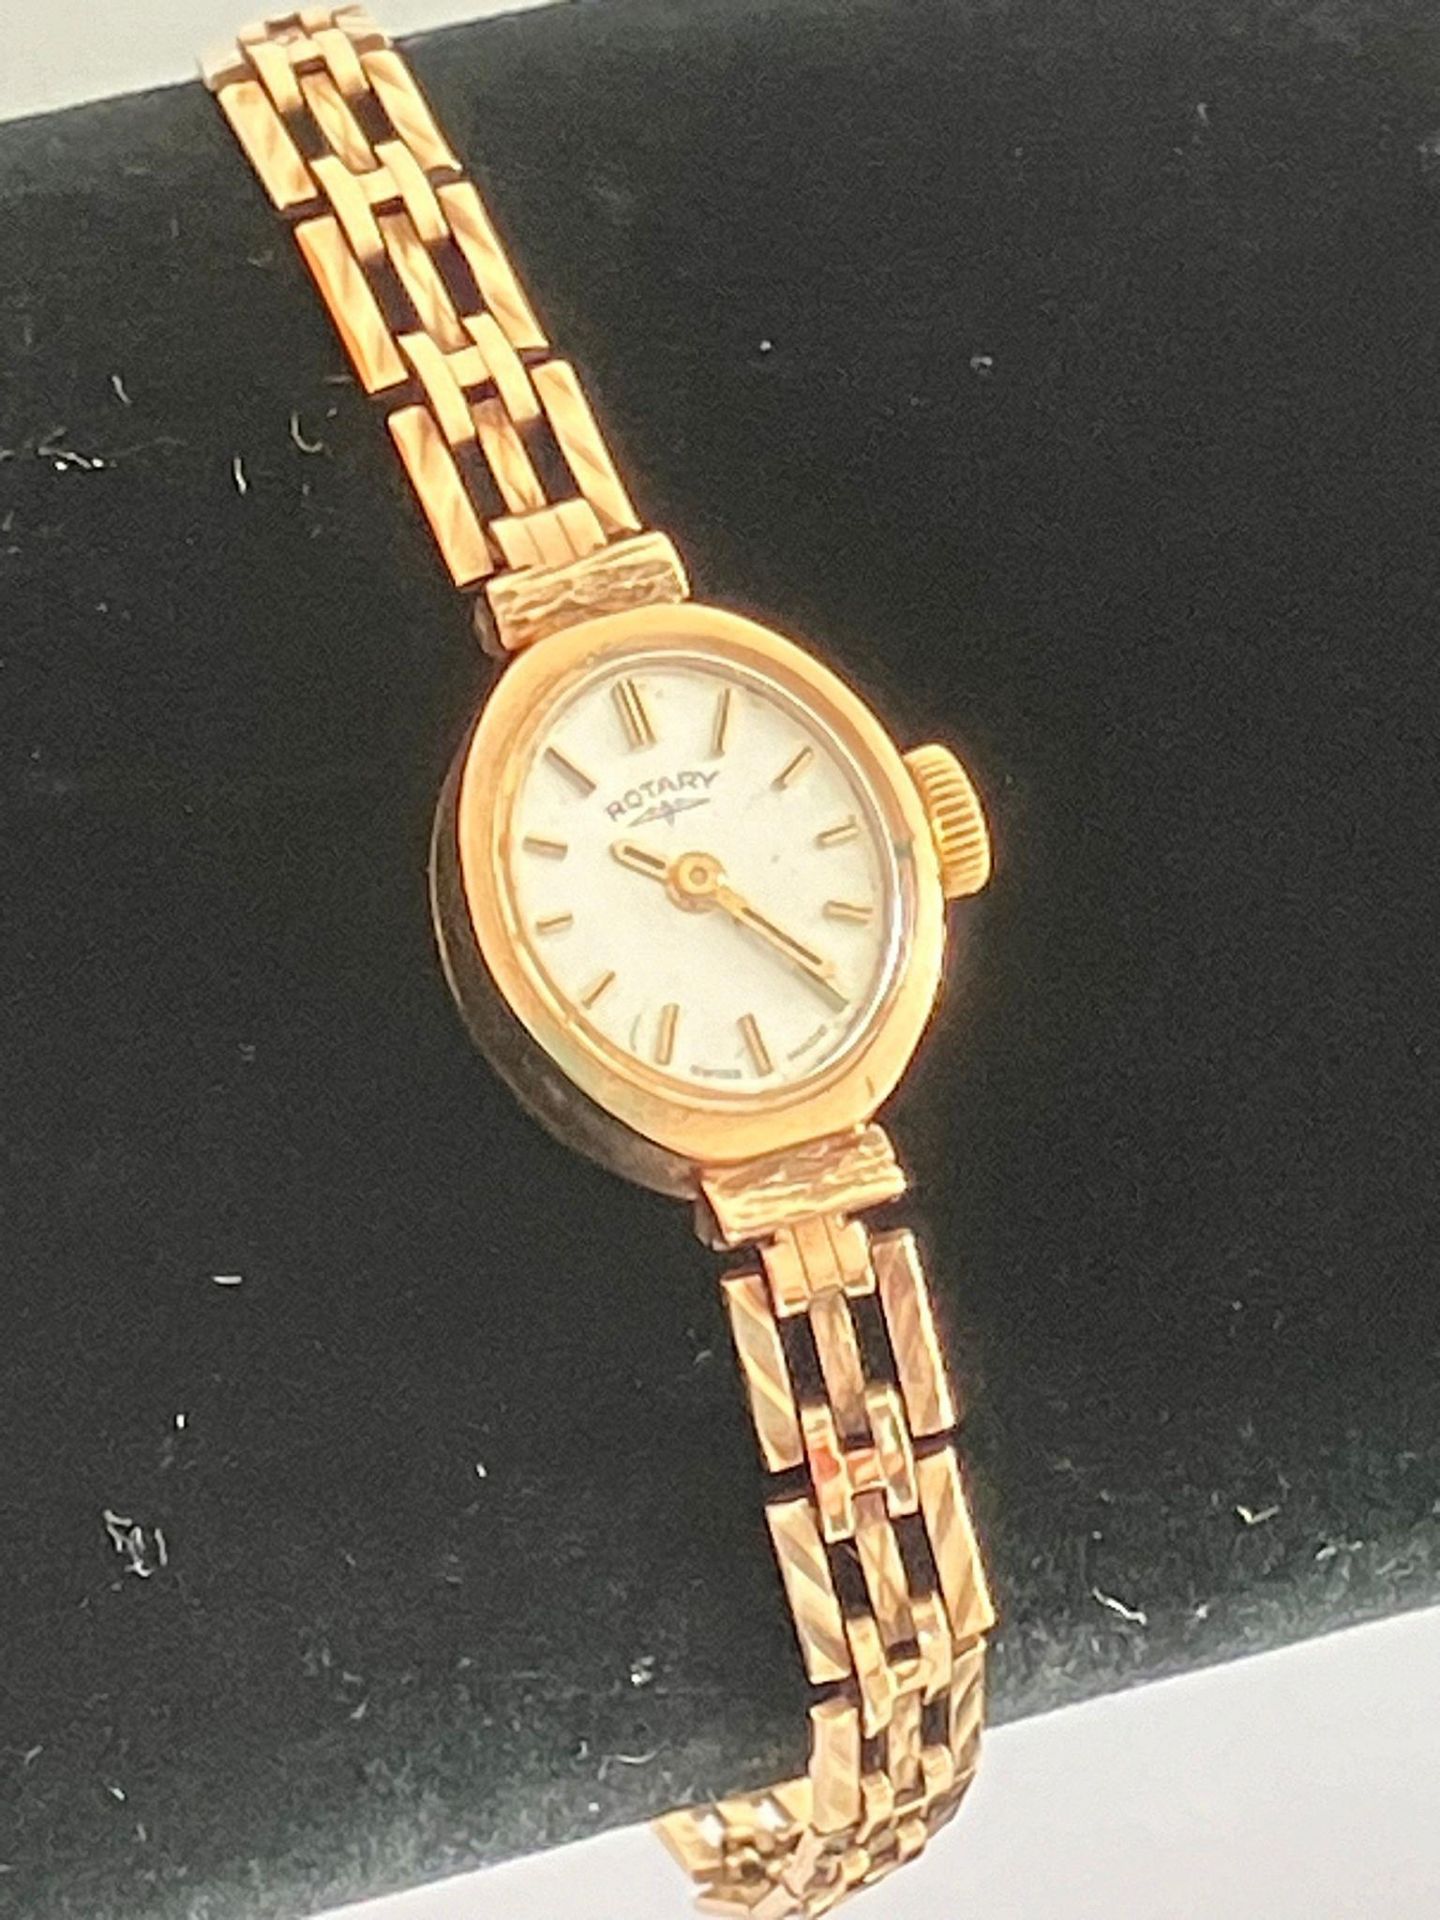 Ladies vintage 9 carat GOLD ROTARY WRISTWATCH complete with 9 carat GOLD Bracelet Strap. Fully